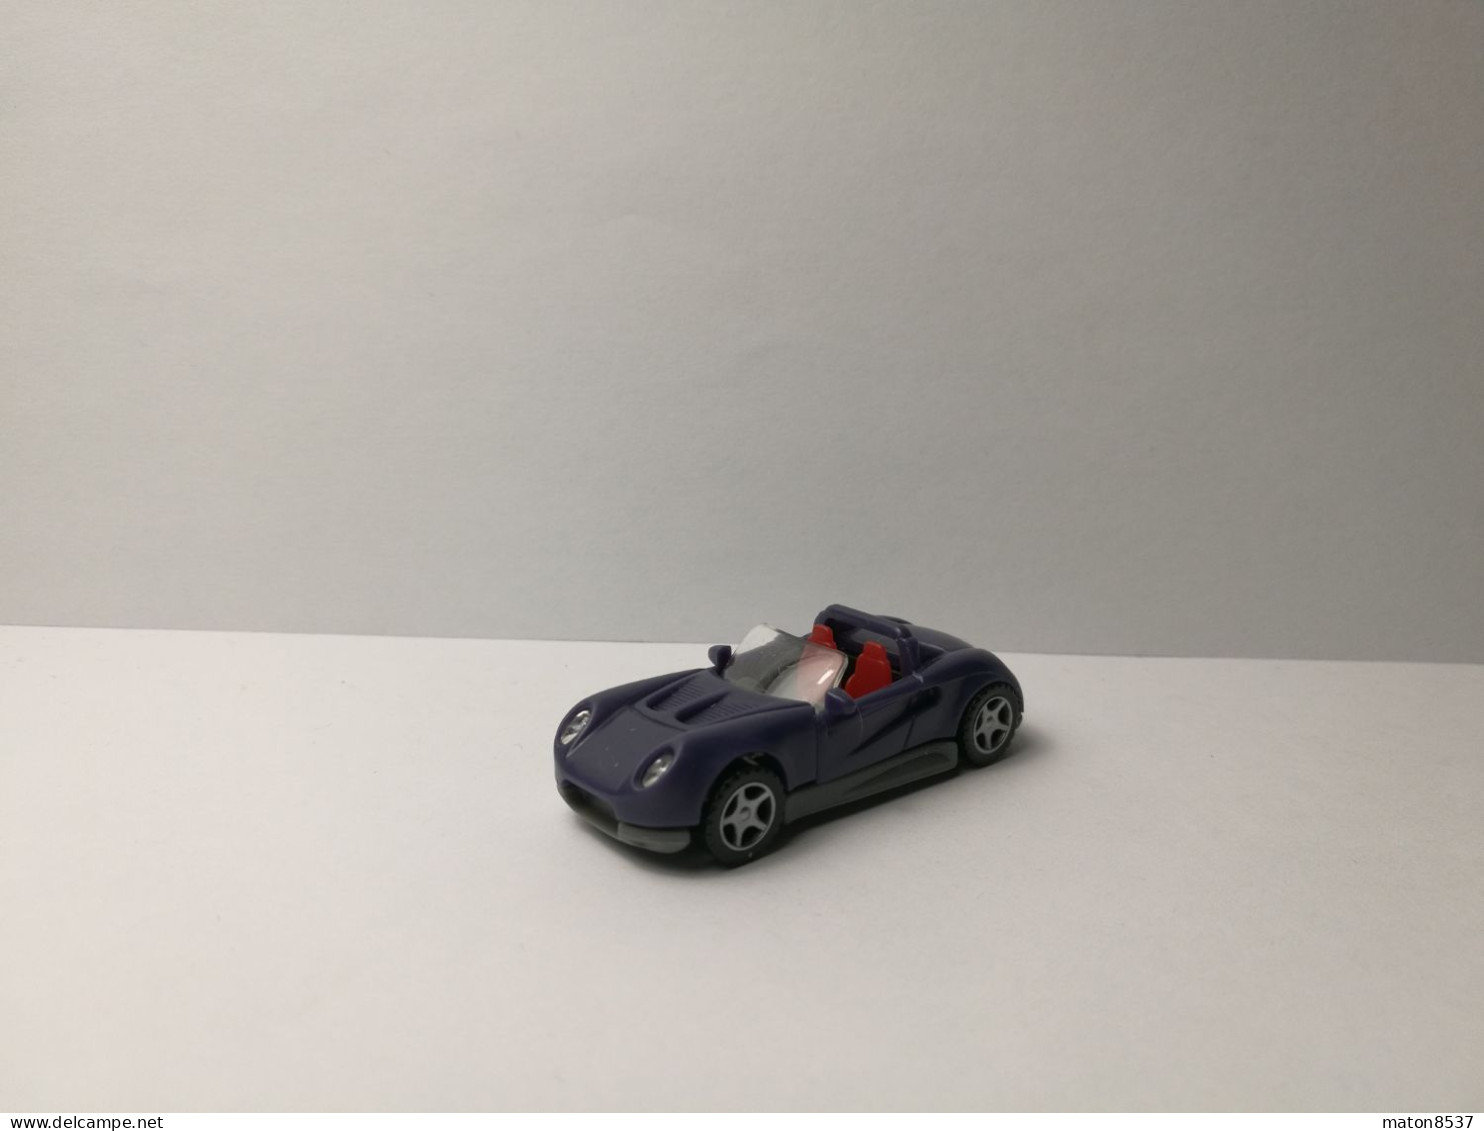 Kinder :  658375    Roadster 1997 - Monte Carlo 3.1 - Inzetting